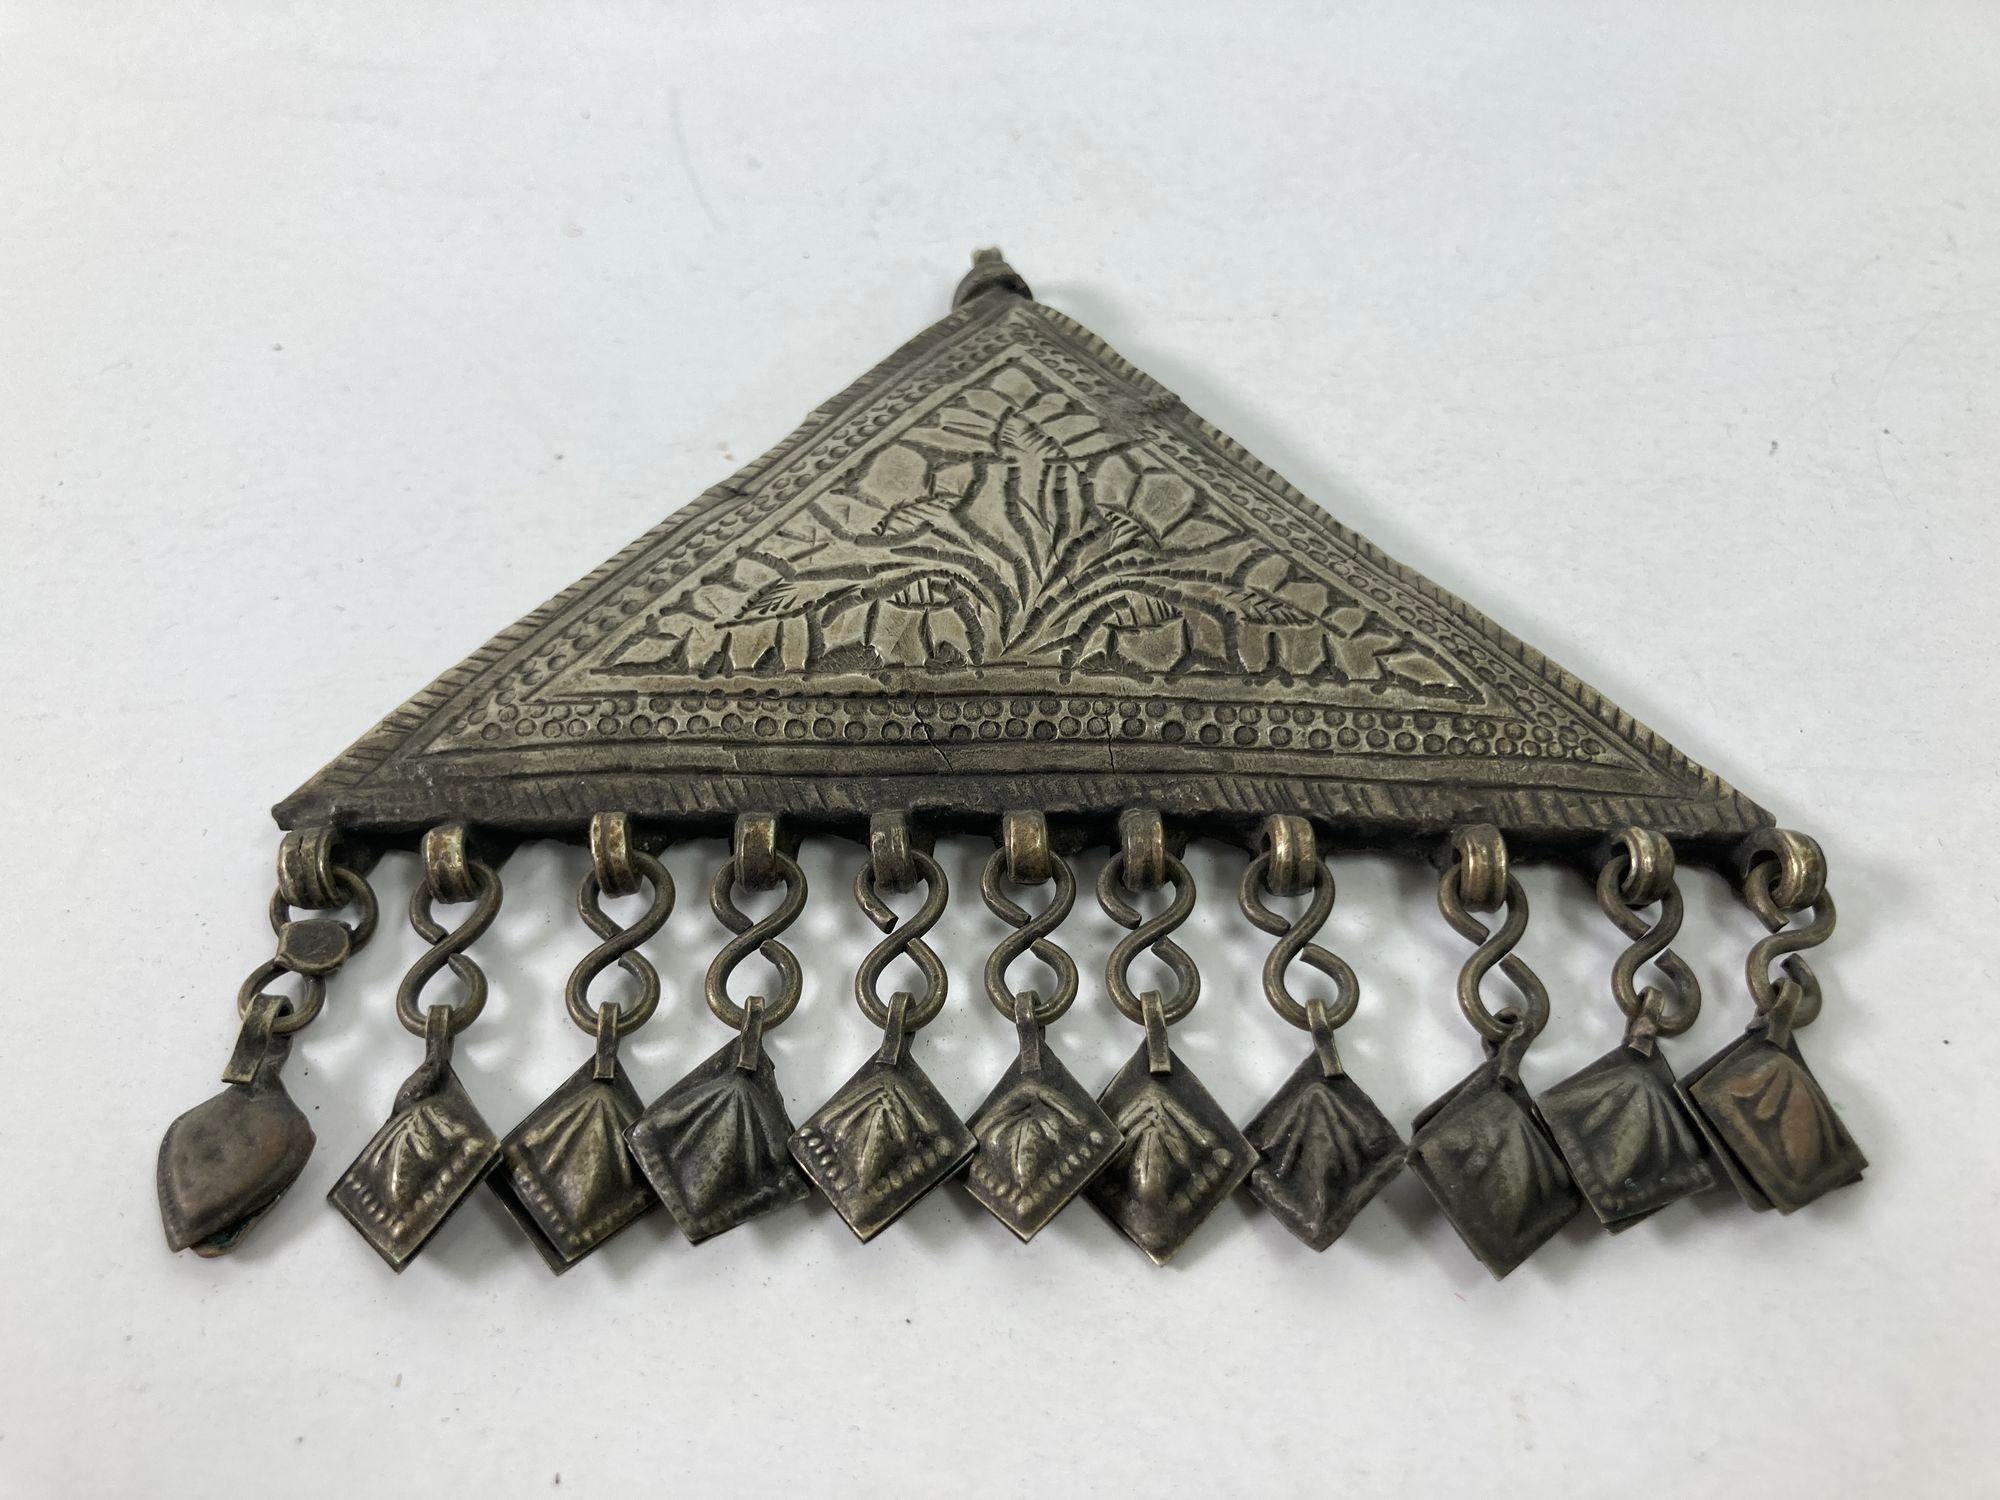 Antique Silver Repousse Islamic Talisman box Holder.
Large Berber tribal ethnic talisman pendant holder.
In triangular shape, silver repousse talisman miniature case which would have stored select verses of the Koran Revelation considered to hold